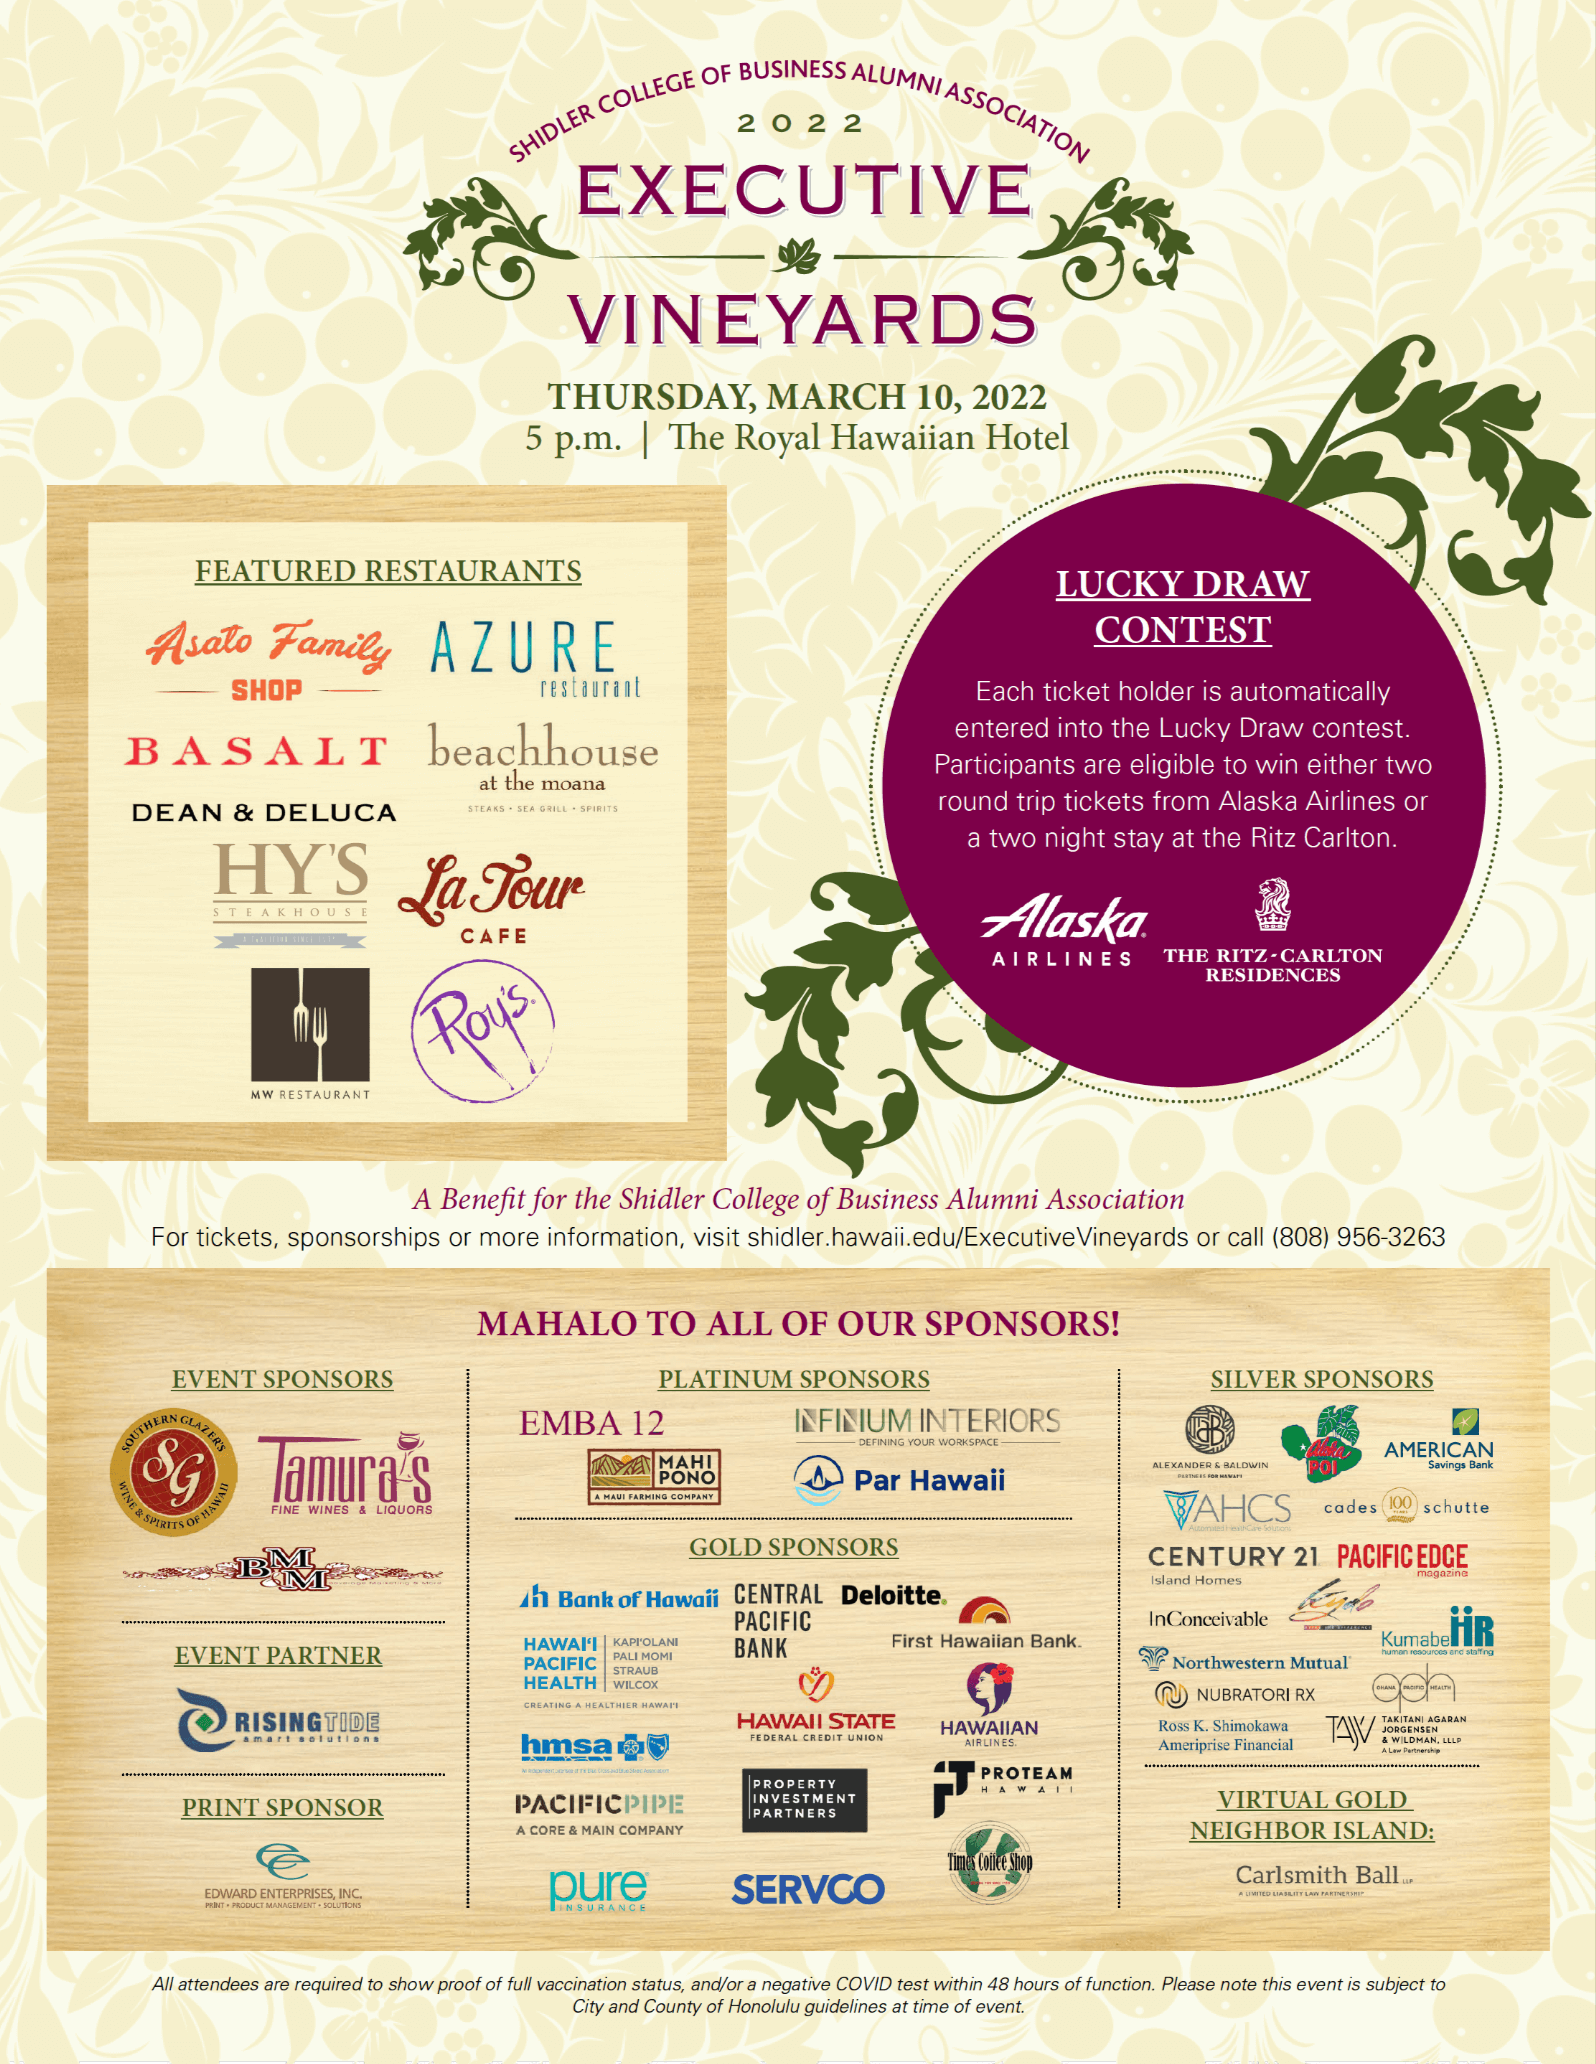 Screenshtot of this year's Executive Vineyards Flyer